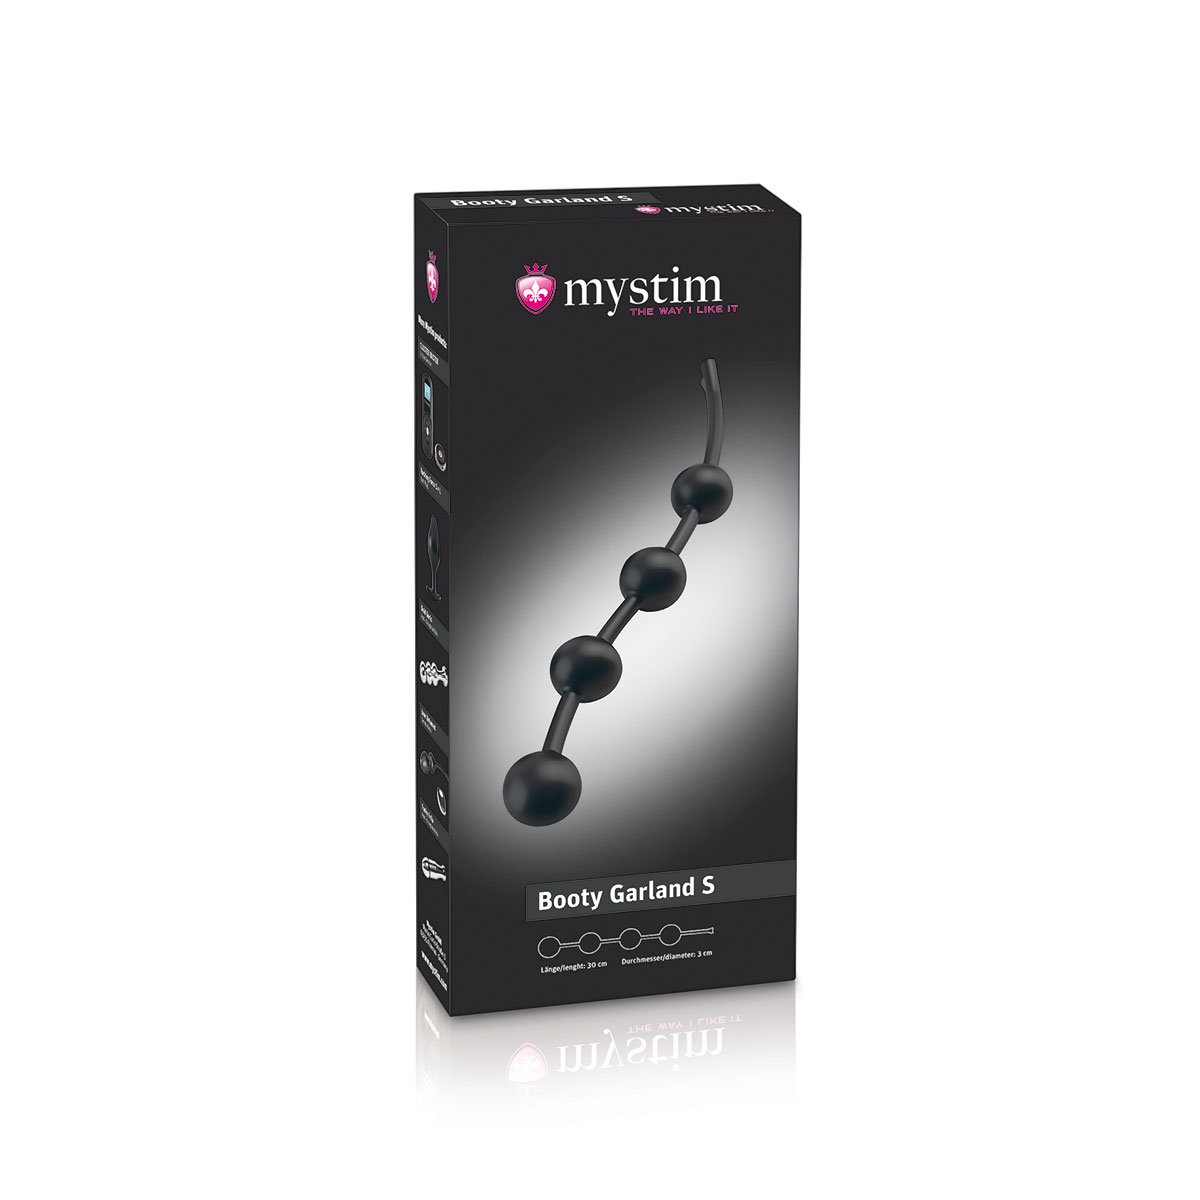 Mystim Booty Garland Anal Chain - Buy At Luxury Toy X - Free 3-Day Shipping